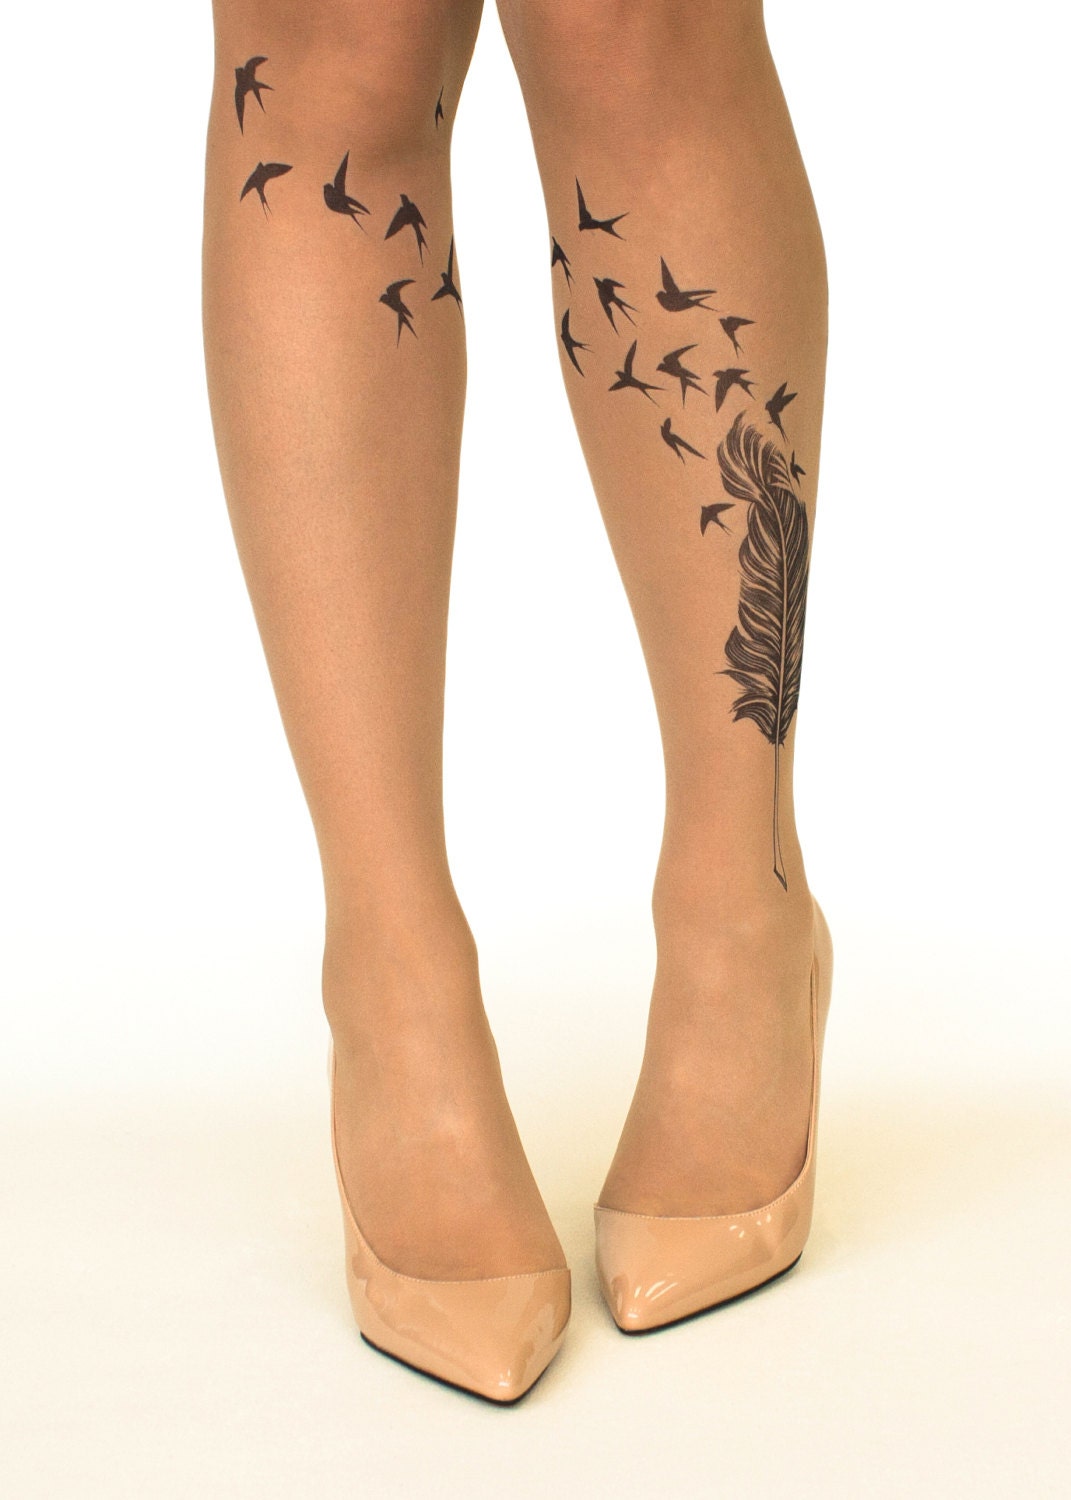 Tattoo Tights/pantyhose With Swallows Feather Sizes S-XL - Etsy